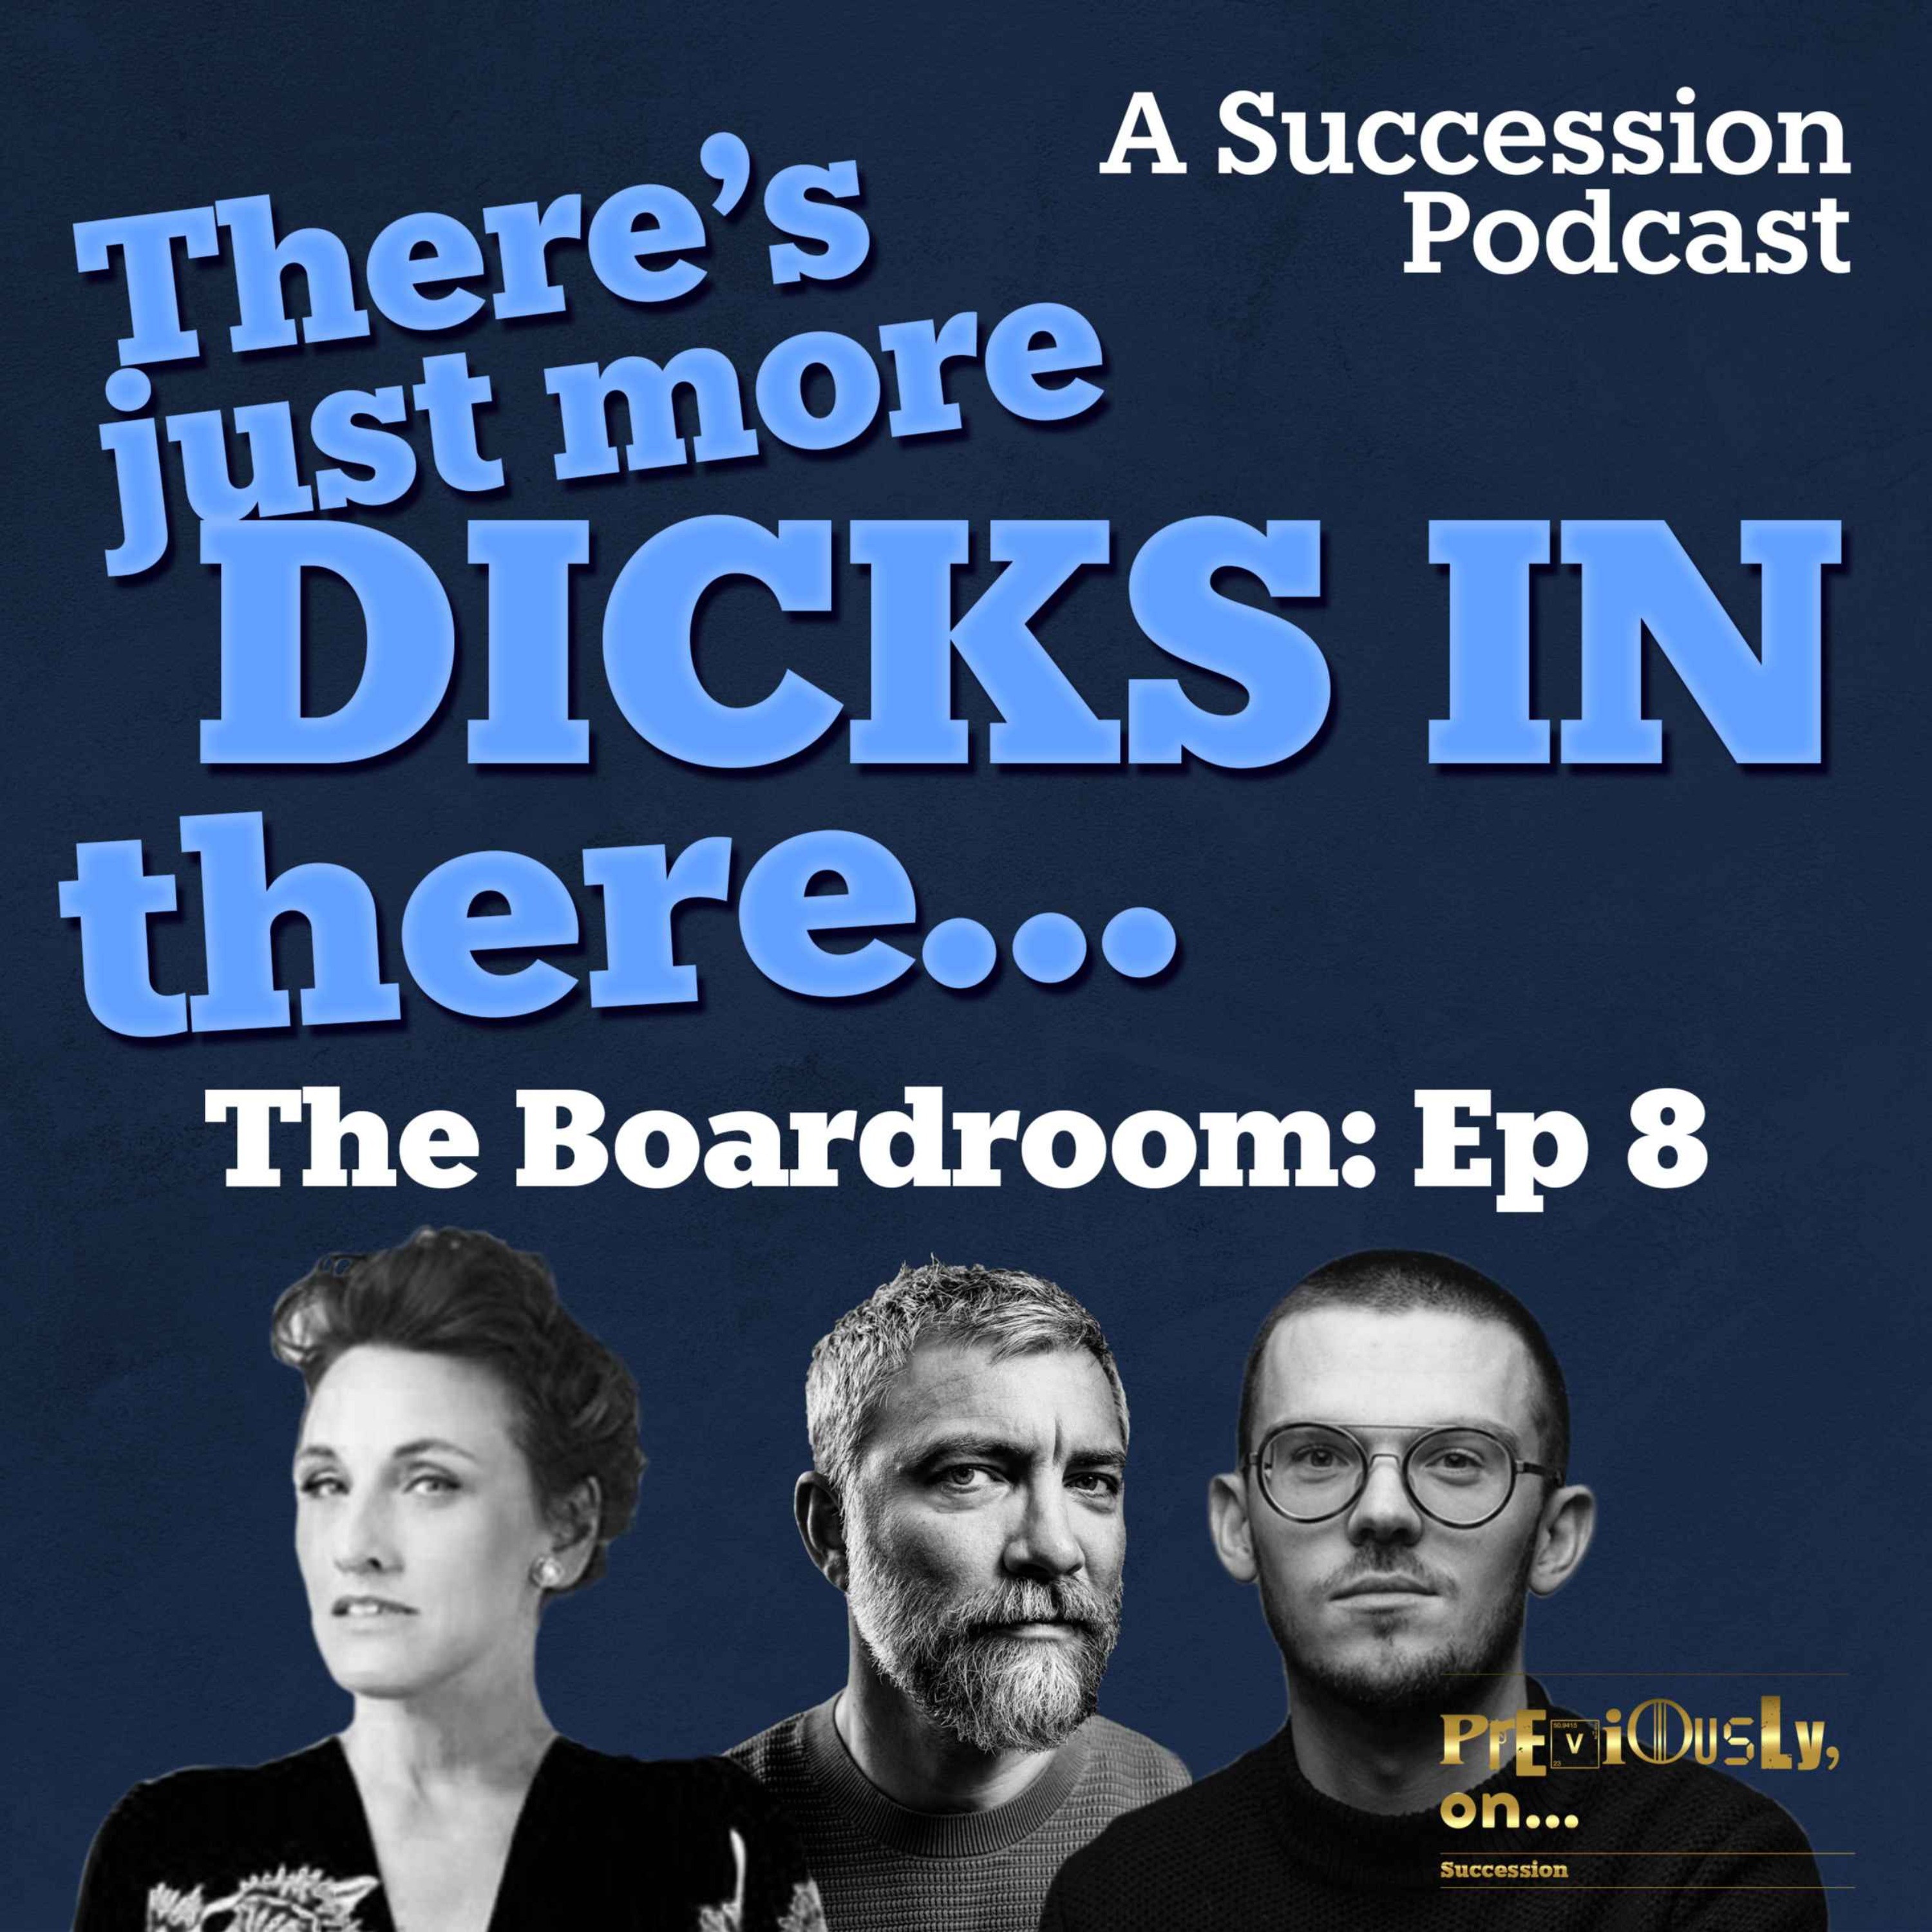 The Boardroom Ep 8: There’s just more dicks in there